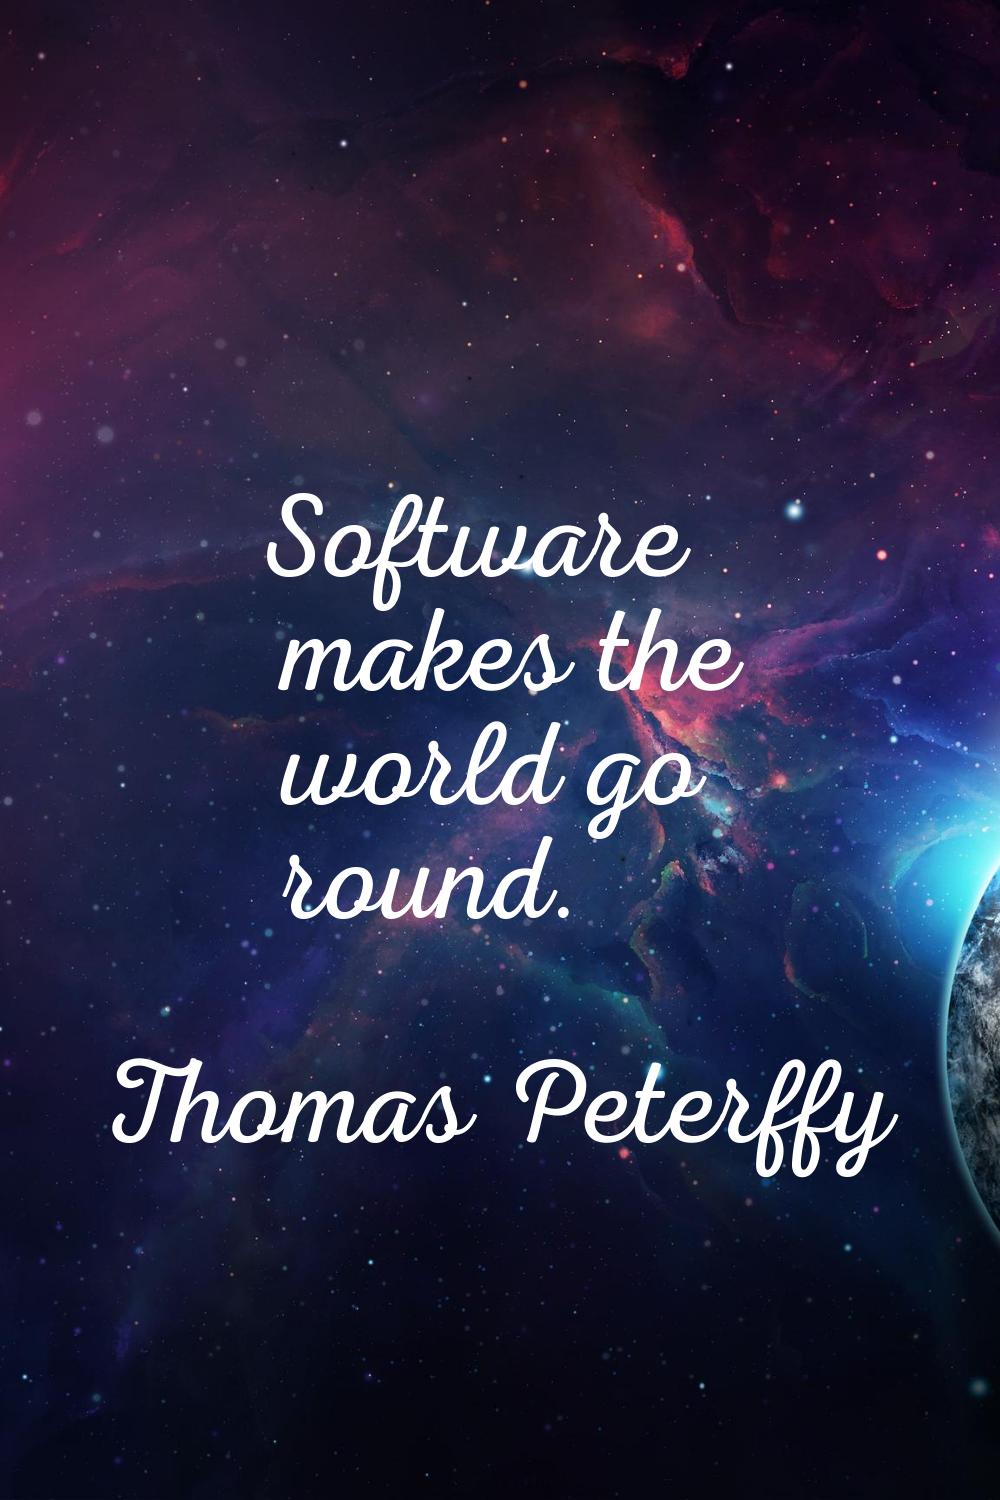 Software makes the world go round.